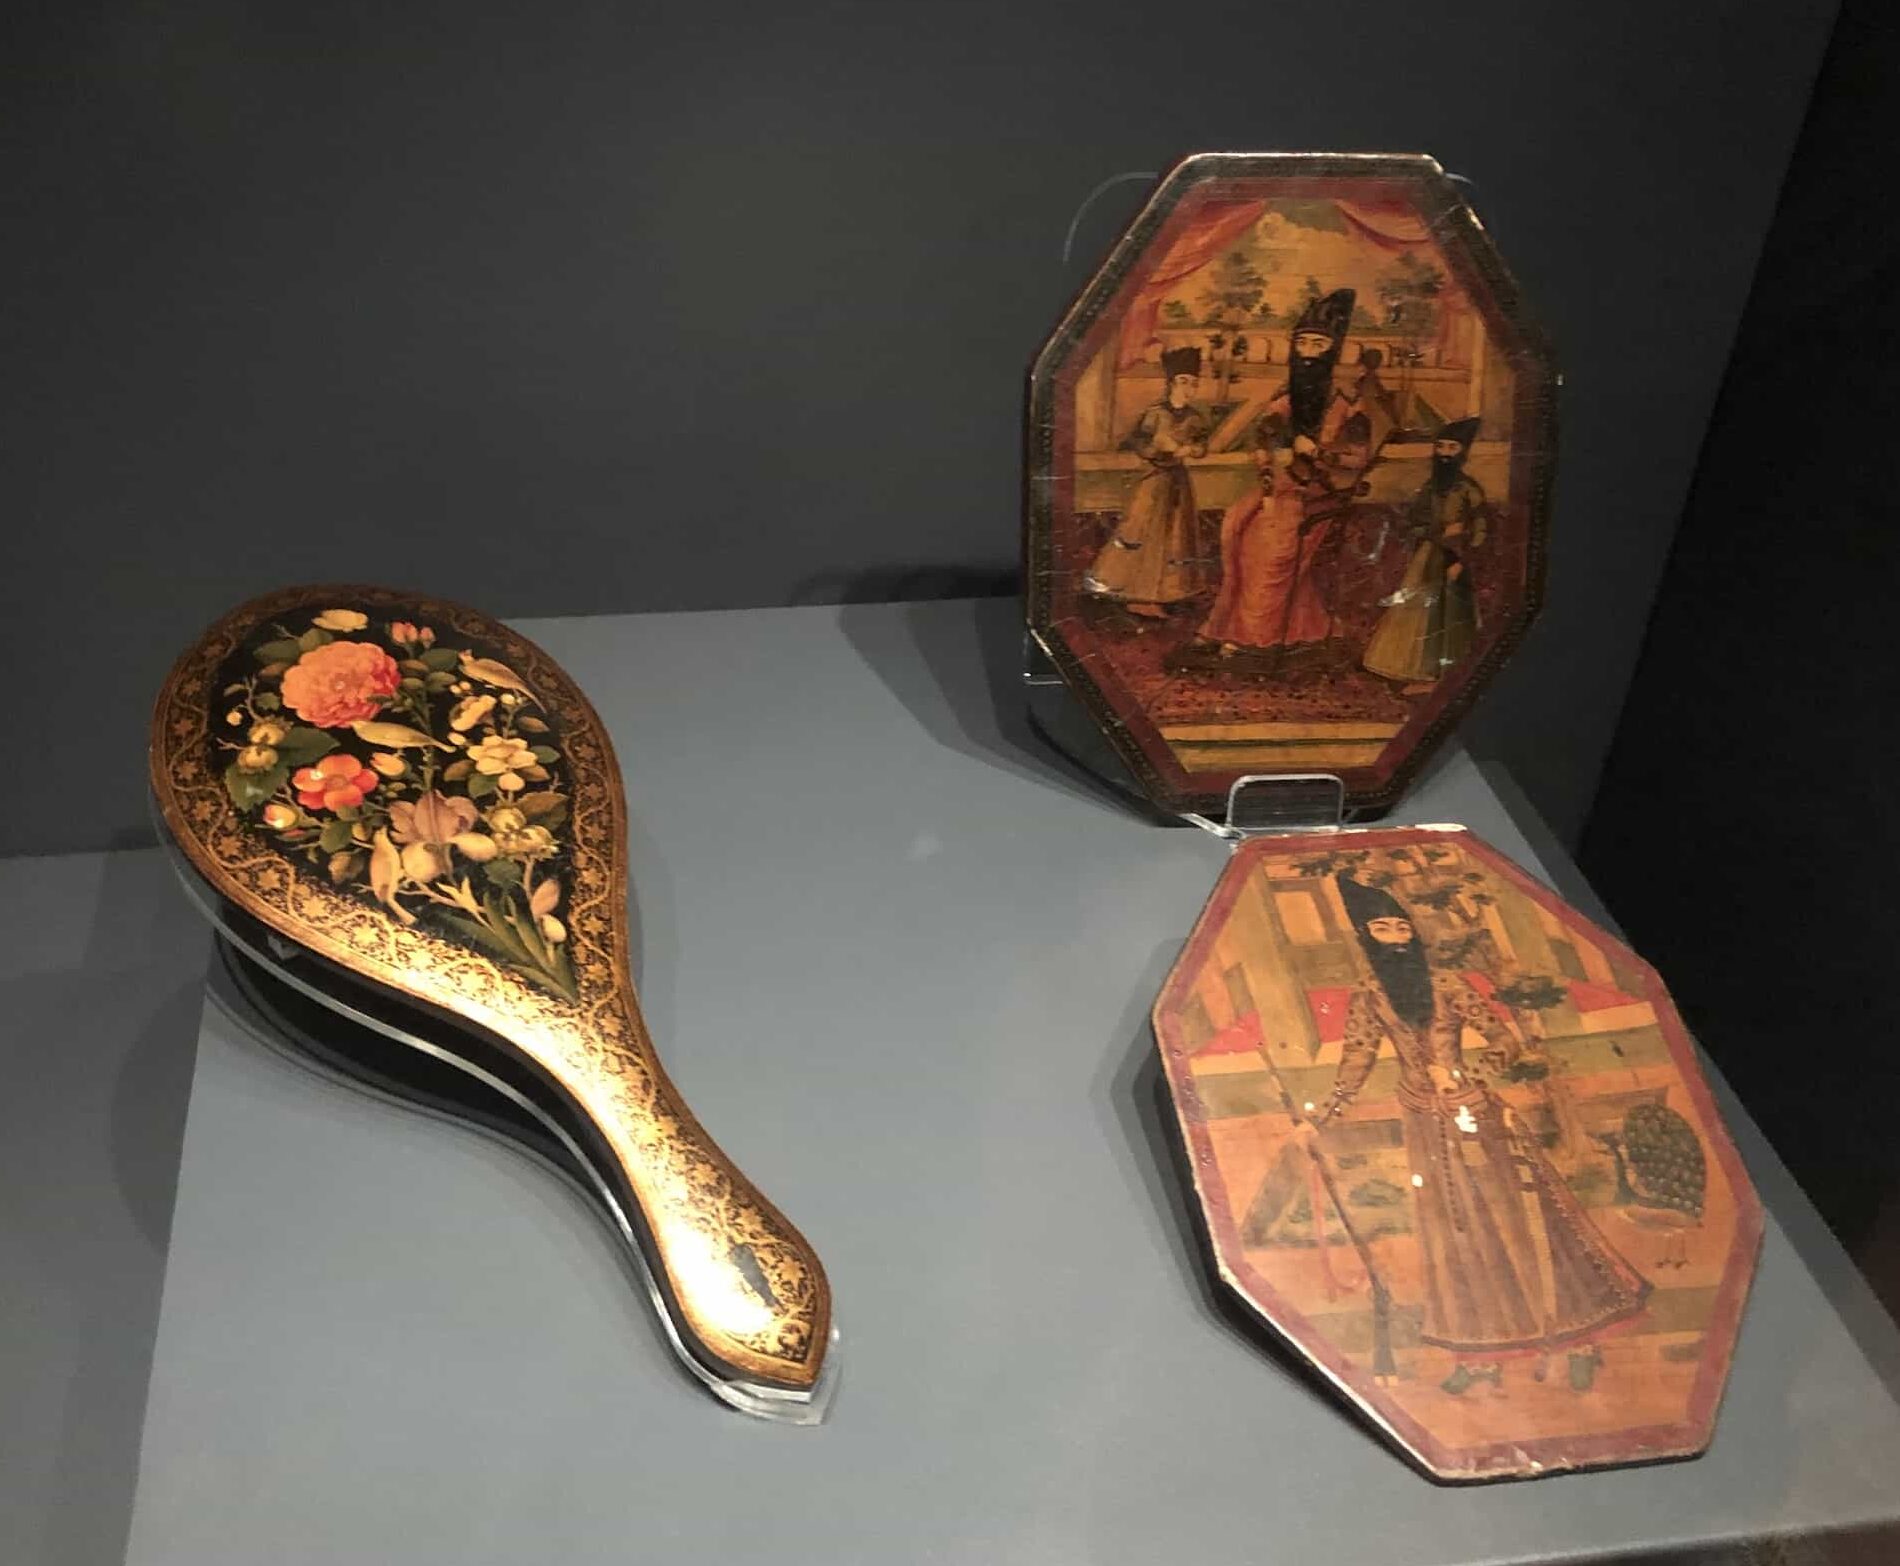 Wooden artifacts from the Qajar period